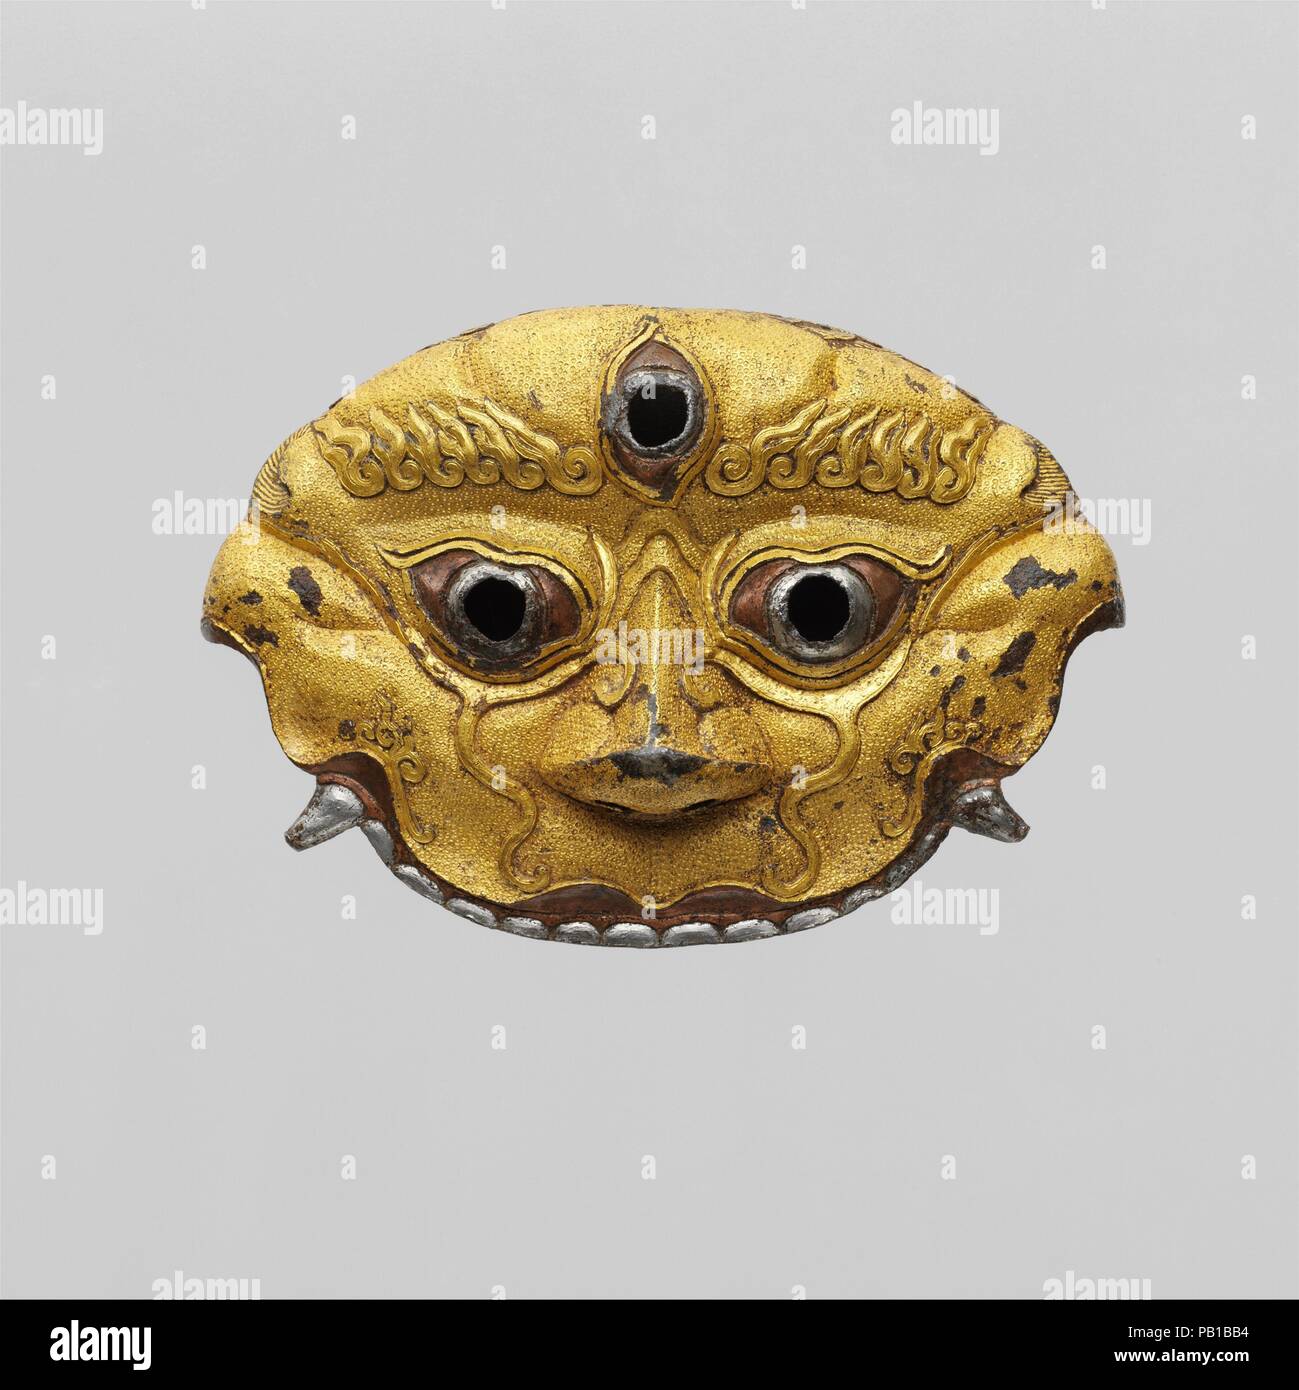 Sword Guard. Culture: Tibetan or Chinese. Dimensions: H. 3 1/4 in. (8.3 cm); W. 4 3/4 in. (12.1 cm). Date: 14th-15th century.  Depicting the face of a wrathful Tibetan Buddhist guardian deity, this extremely rare sword guard was originally part of a complete and very lavish sword. It is from the peak period of Tibetan or Sino-Tibetan ironwork, coinciding with the rule of the Phagmodrupa kings in central Tibet and the Hongwu and Yongle dynasties in China. It is exceptional for the precision and crispness of its chiseling, punched work, and damascening; for the height of the raised decoration; a Stock Photo